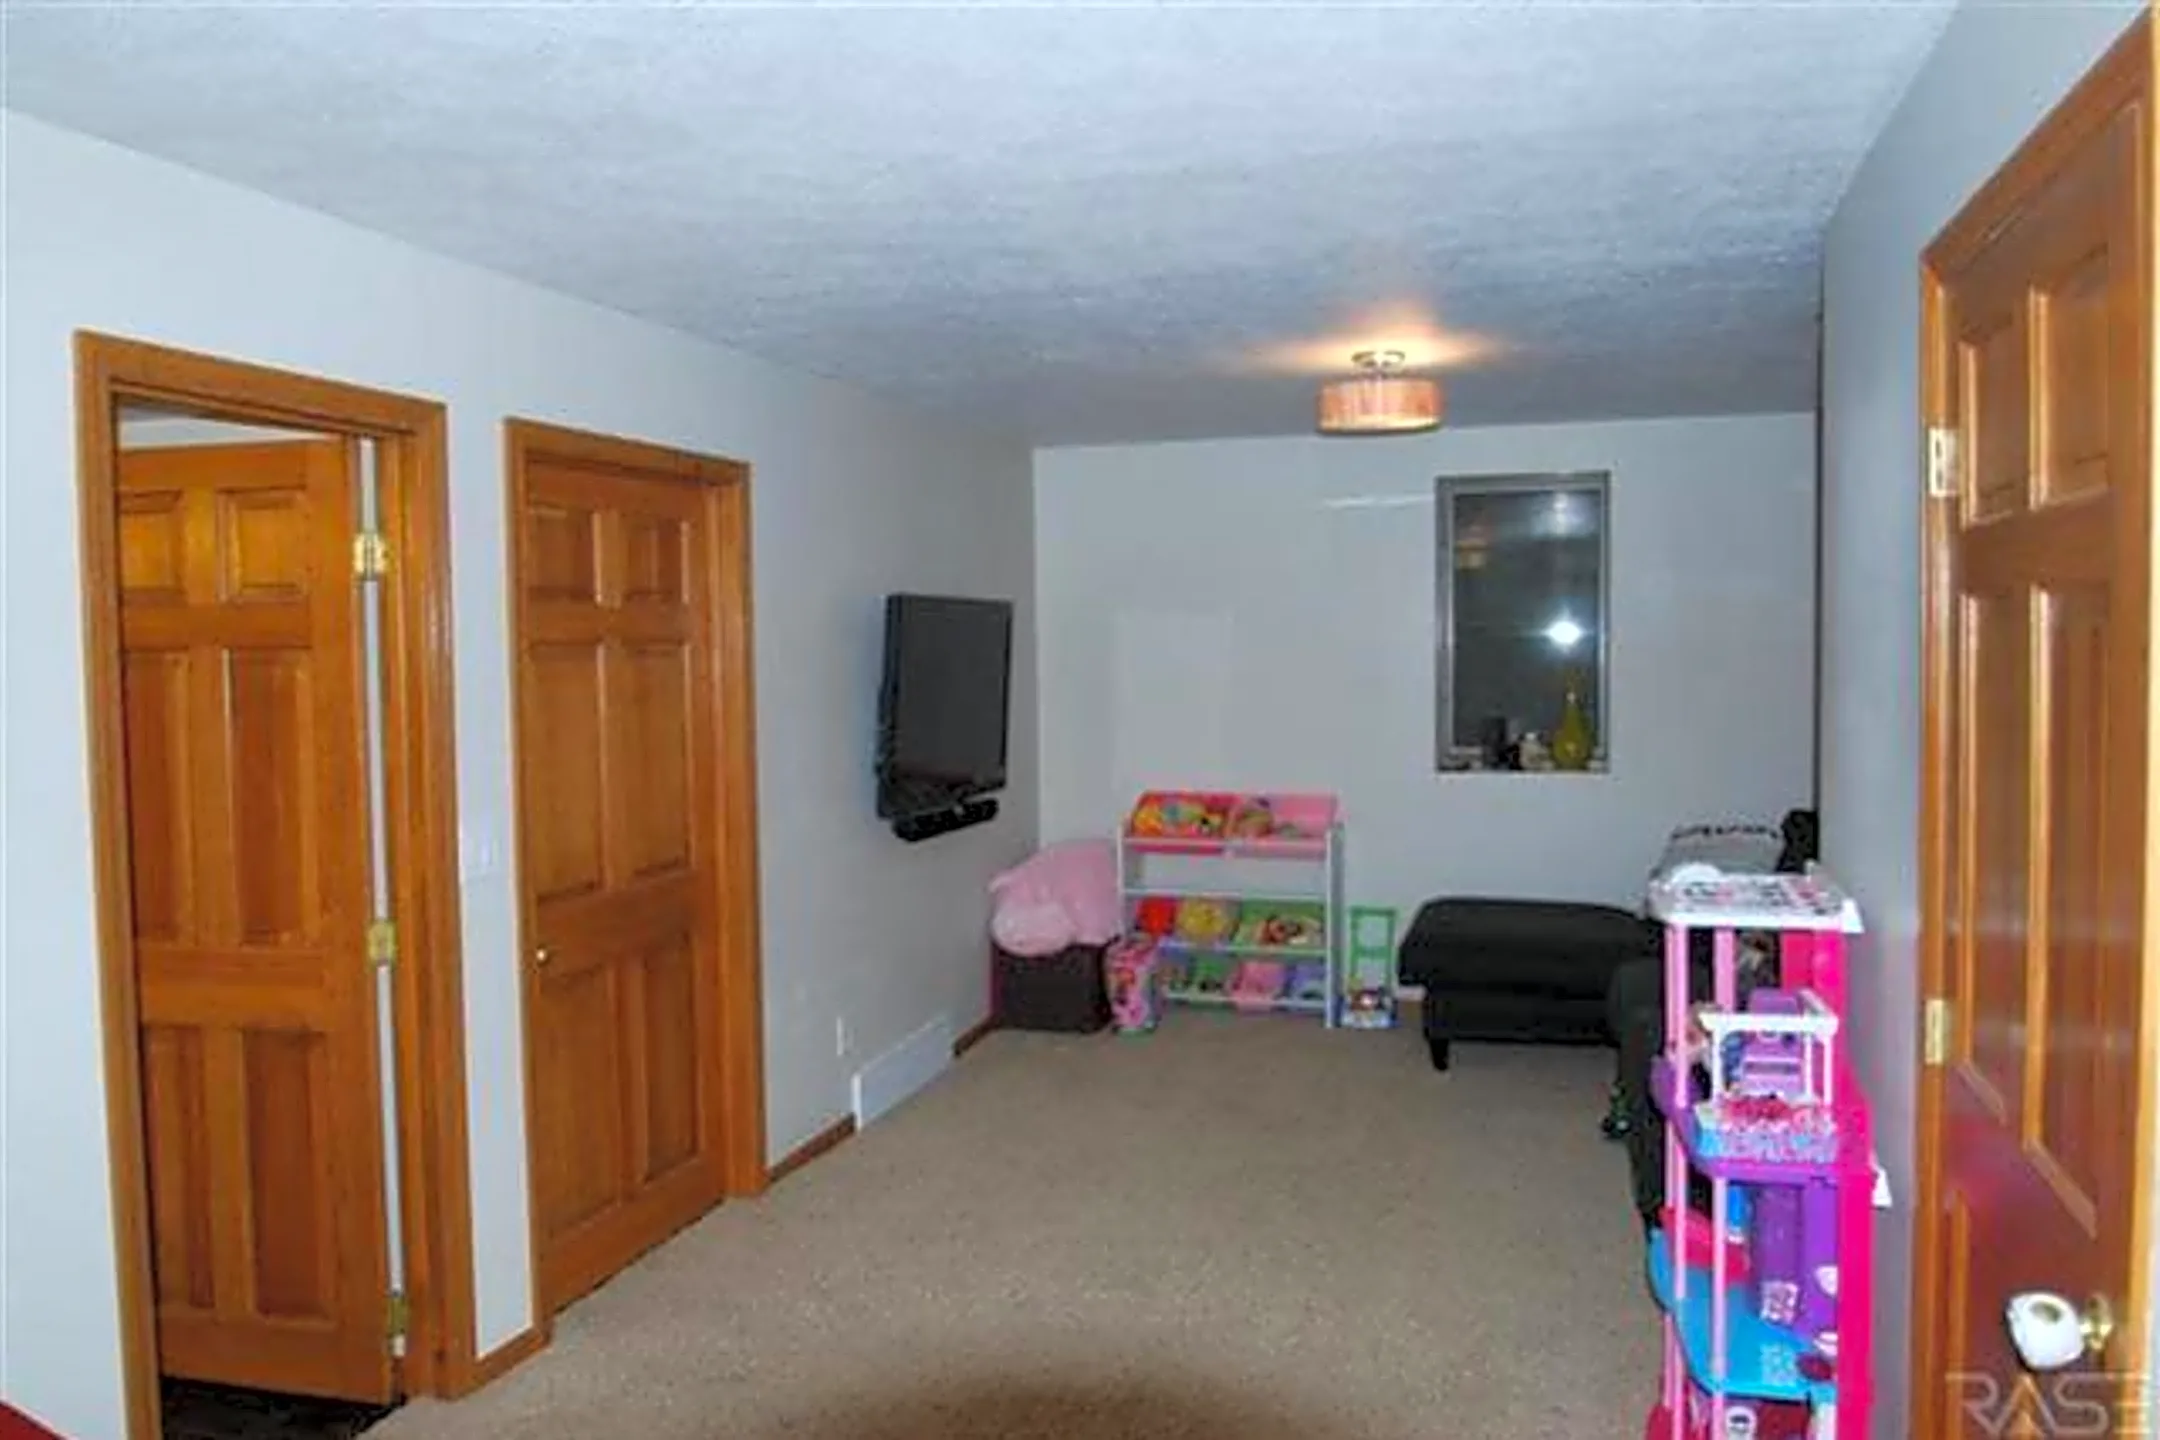 Bedroom - 1404 S Main Ave - Sioux Falls, SD